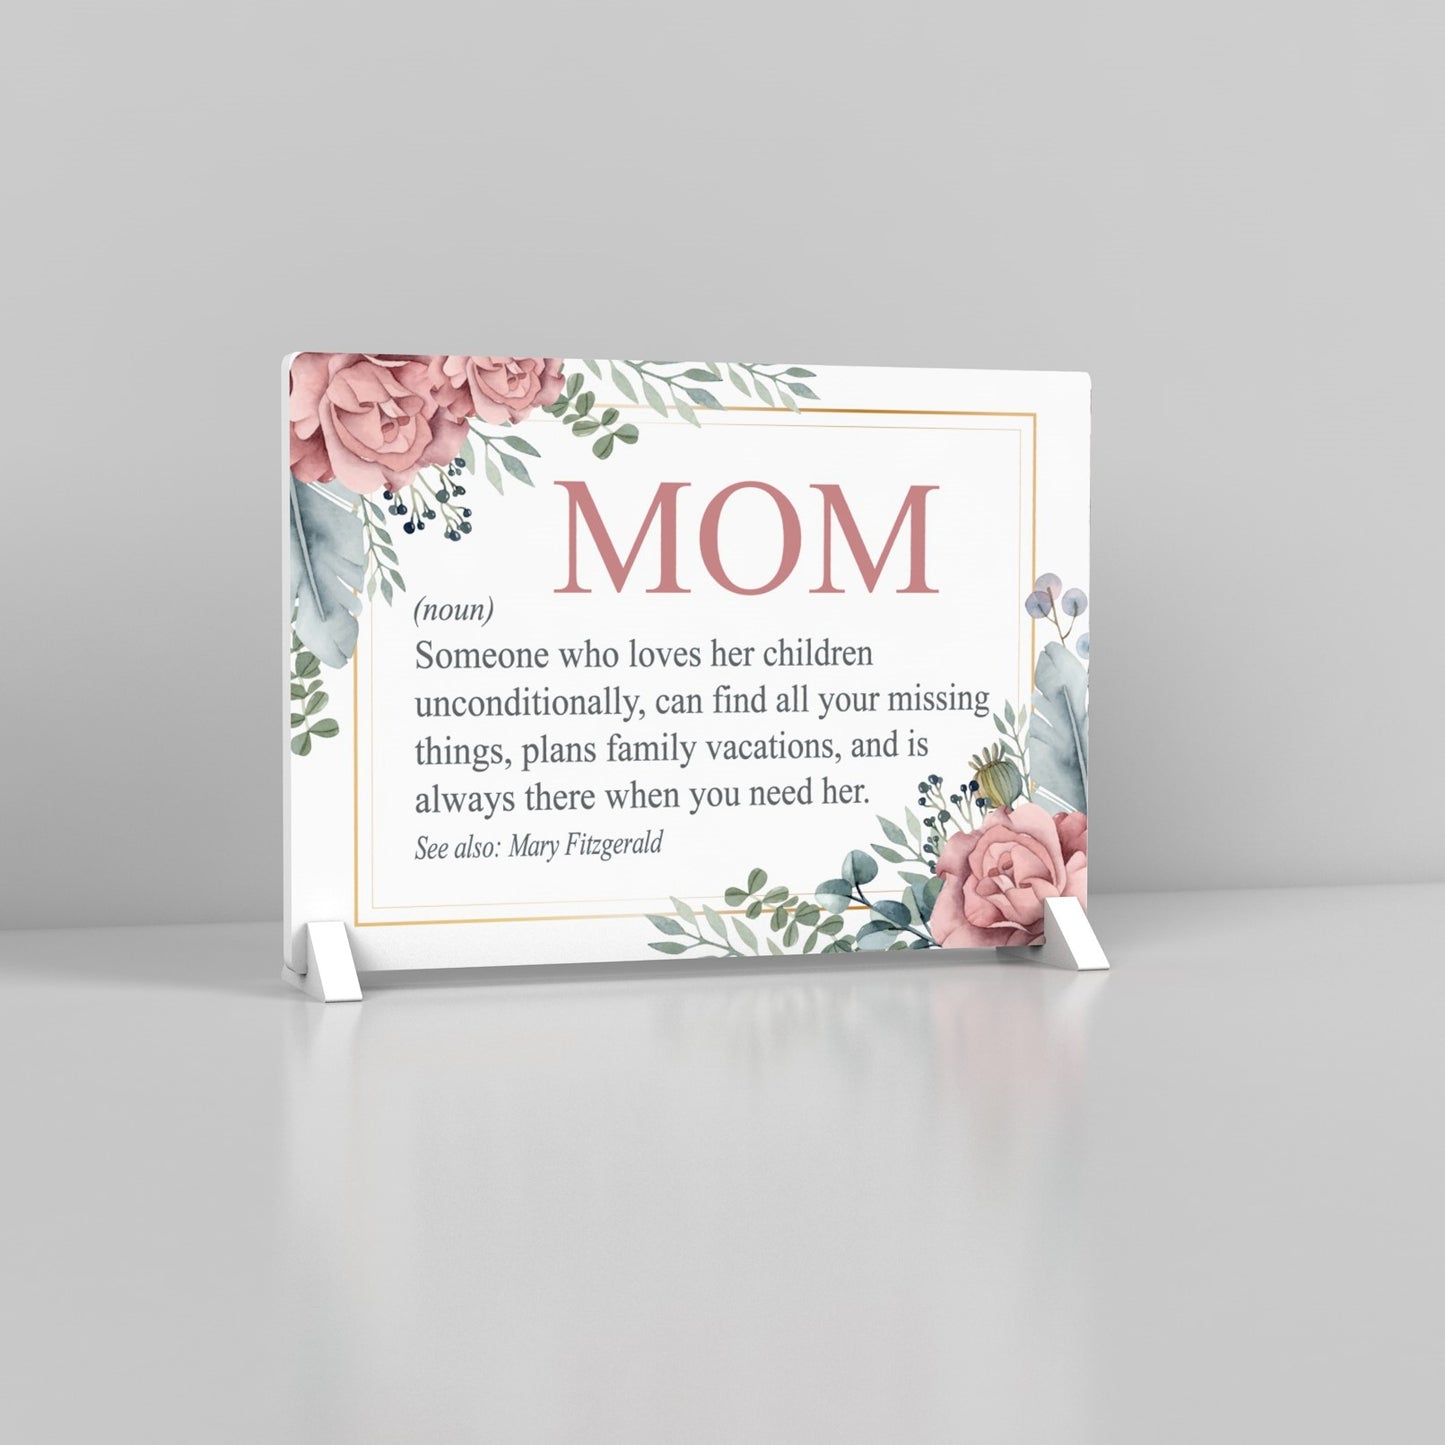 Personalized Mothers Day Gift - Gift Idea For Mom - Personalized Mom Sign for Home Decor